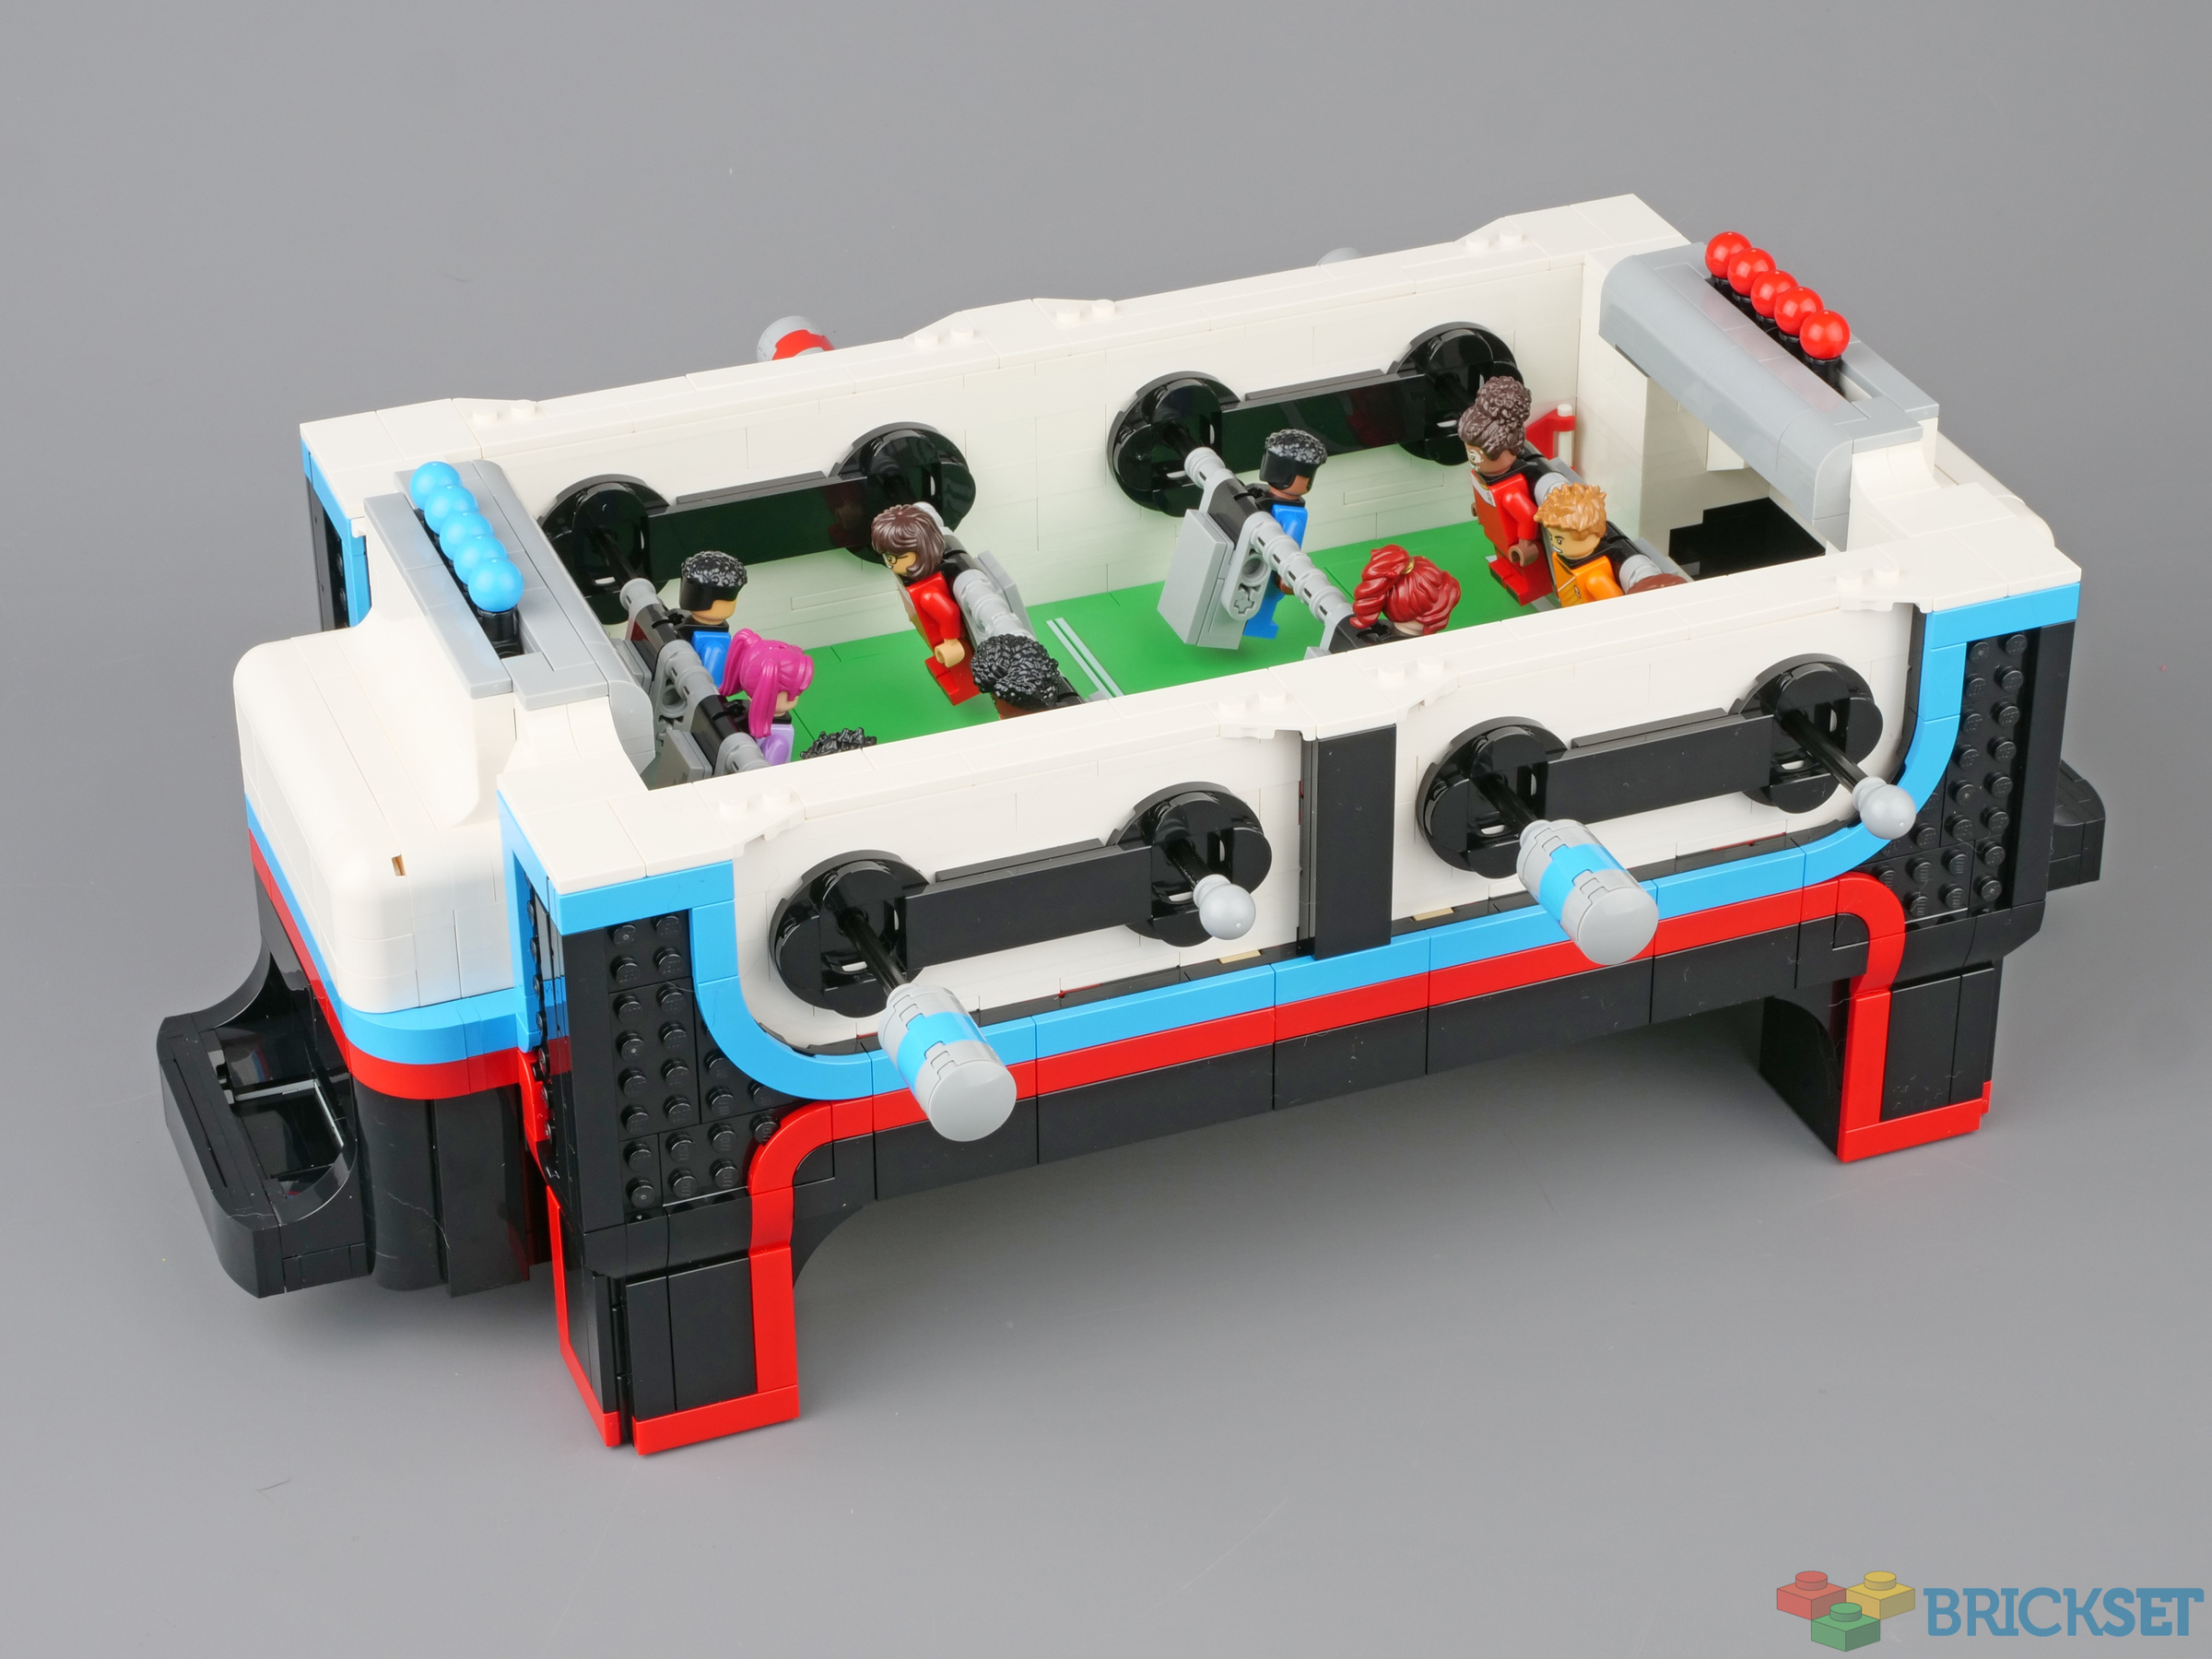 Table Football LEGO Review: Perfect Timing with the World Cup – Lightailing